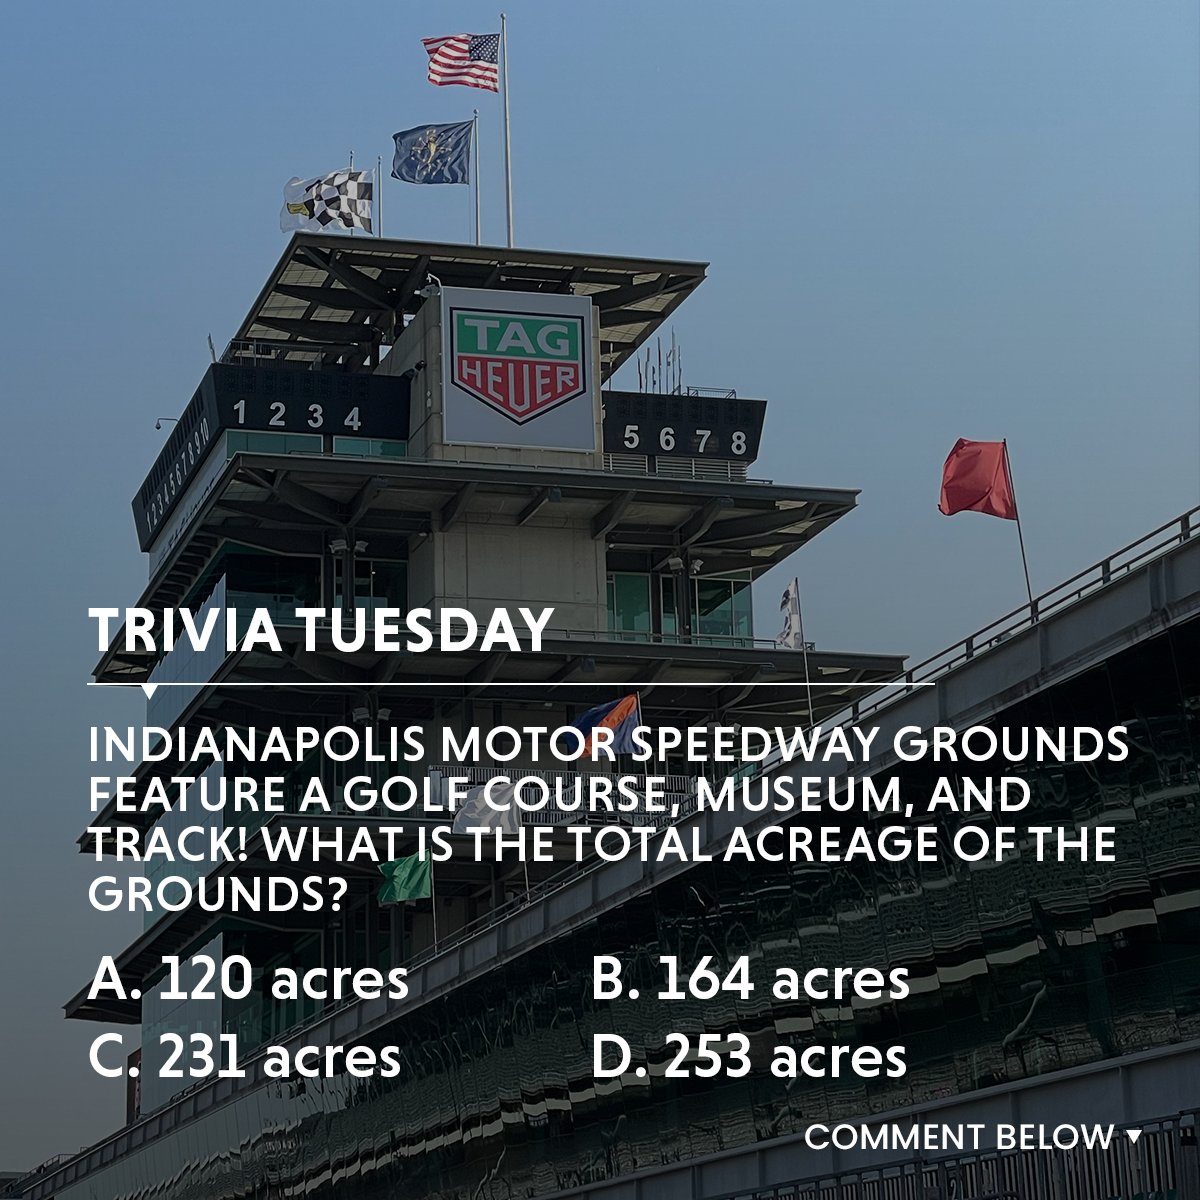 🏁 It's officially May, which means it's an exciting time to be in Indianapolis! Especially with the 108th running of the Indianapolis 500 on the horizon at @IMS!

❓ Get yourself prepared for the biggest spectacle in sports with some #TuesdayTrivia!

#Indy500 #LucasWorks #Racing